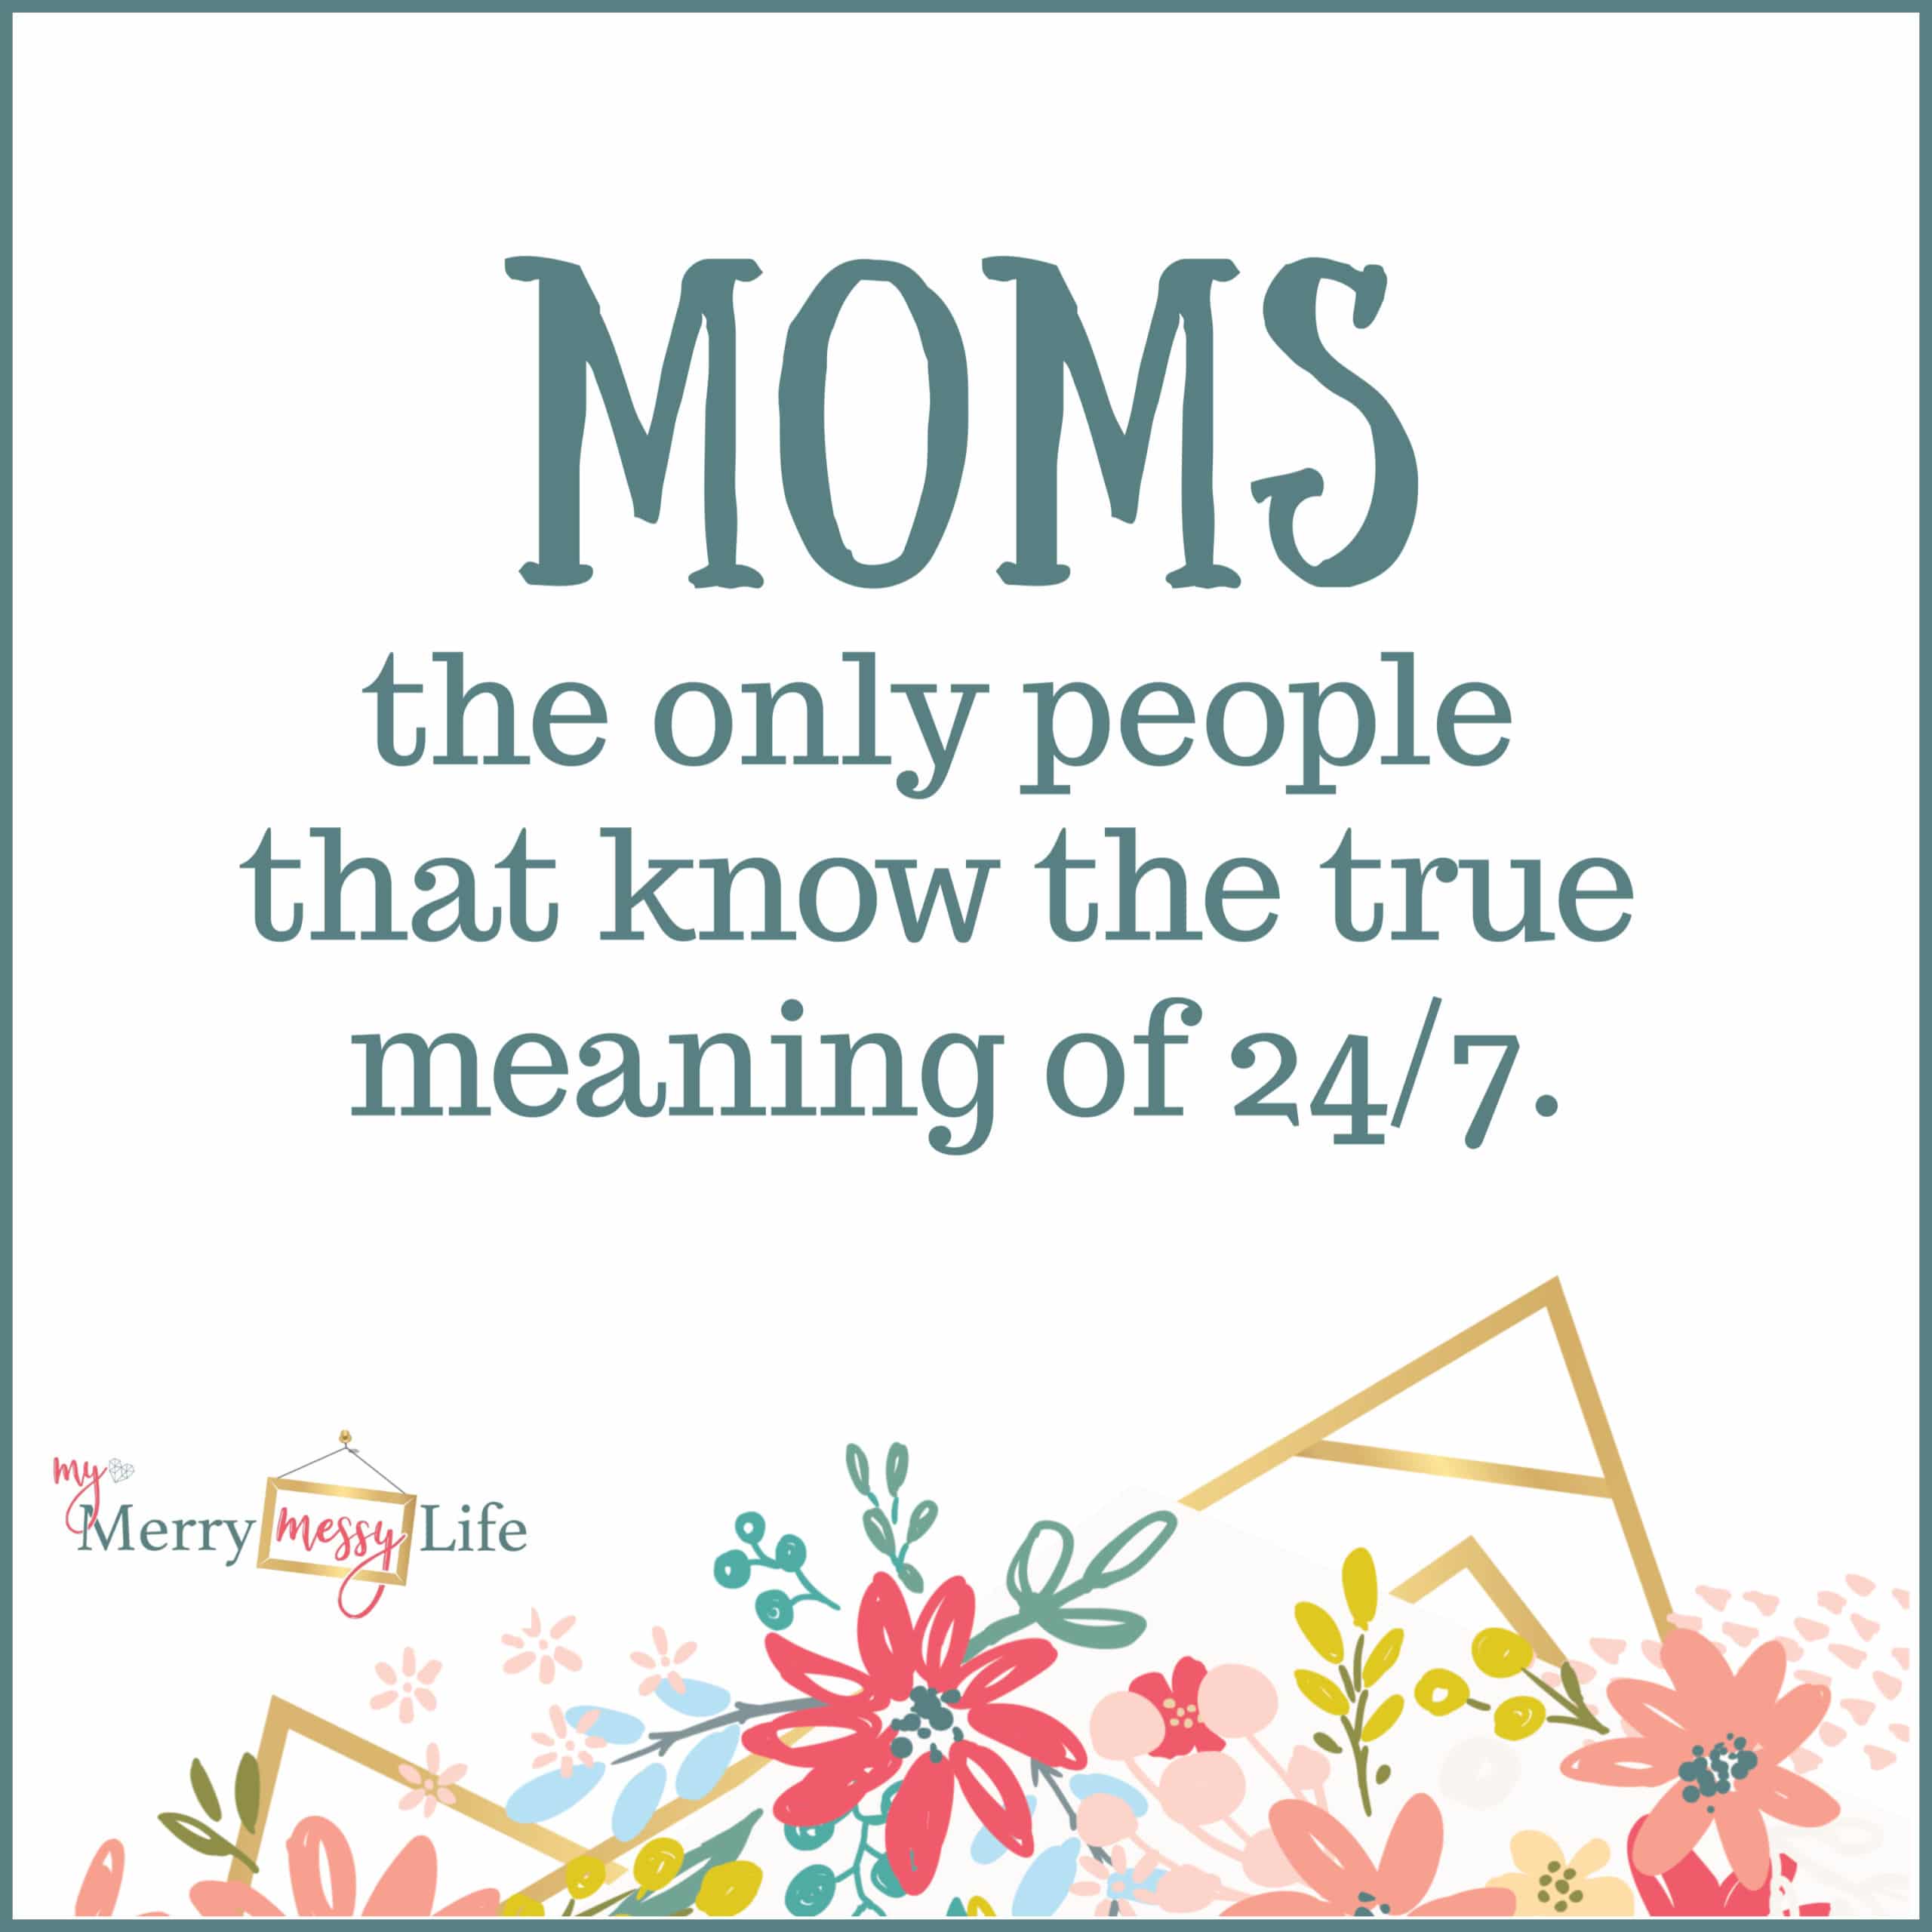 Moms - the only people that know the true meaning of 24/7 - Funny Mom Memes